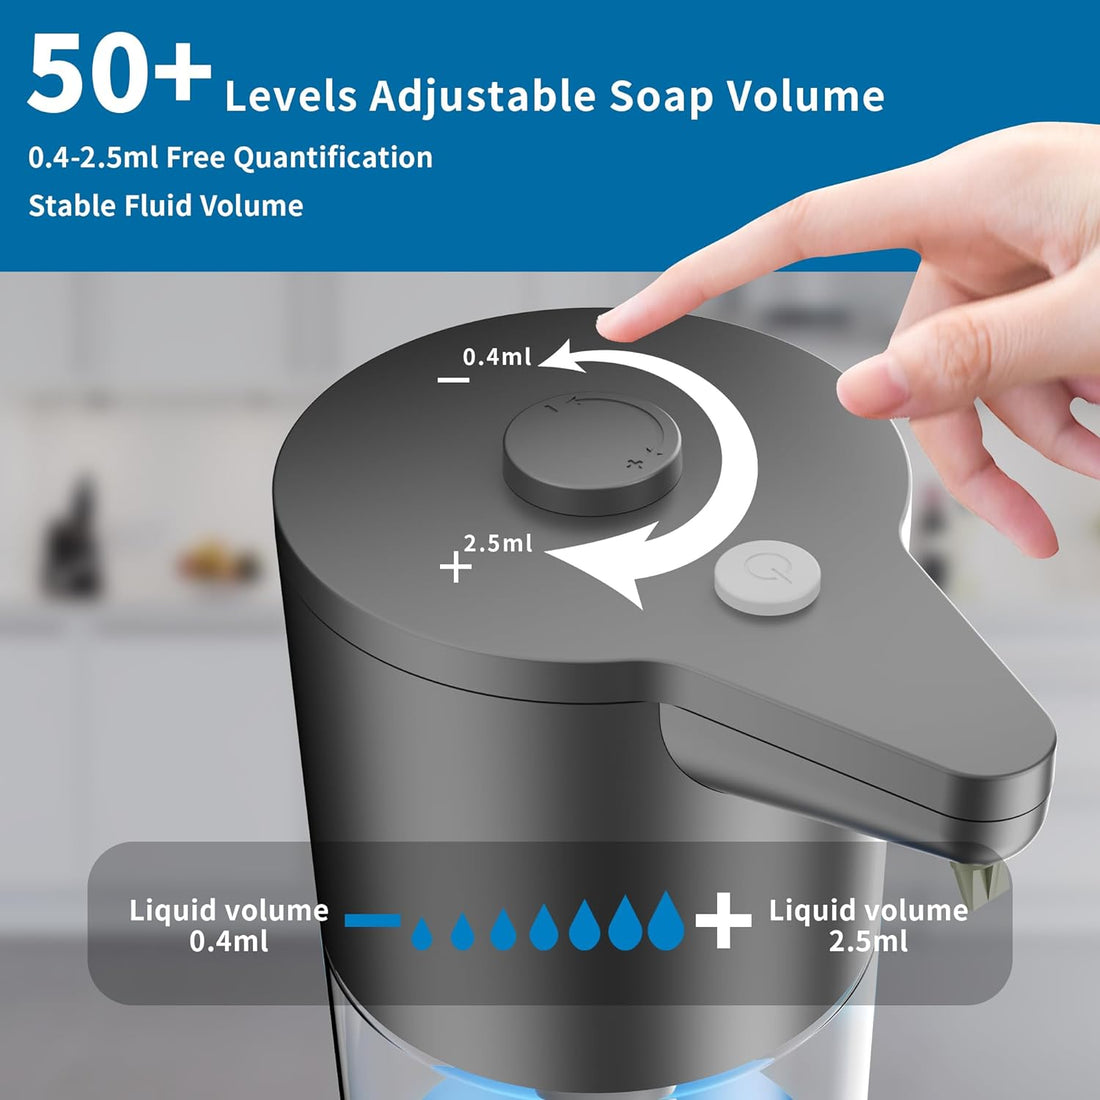 Aunmaon Automatic Soap Dispenser Touchless, Hand Soap Dispenser 50 Adjustable Volume for Thick and Thin Liquid Battery Electric,Dish Soap Dispenser Kitchen Bathroom,Auto Soap Dispenser Hands Free